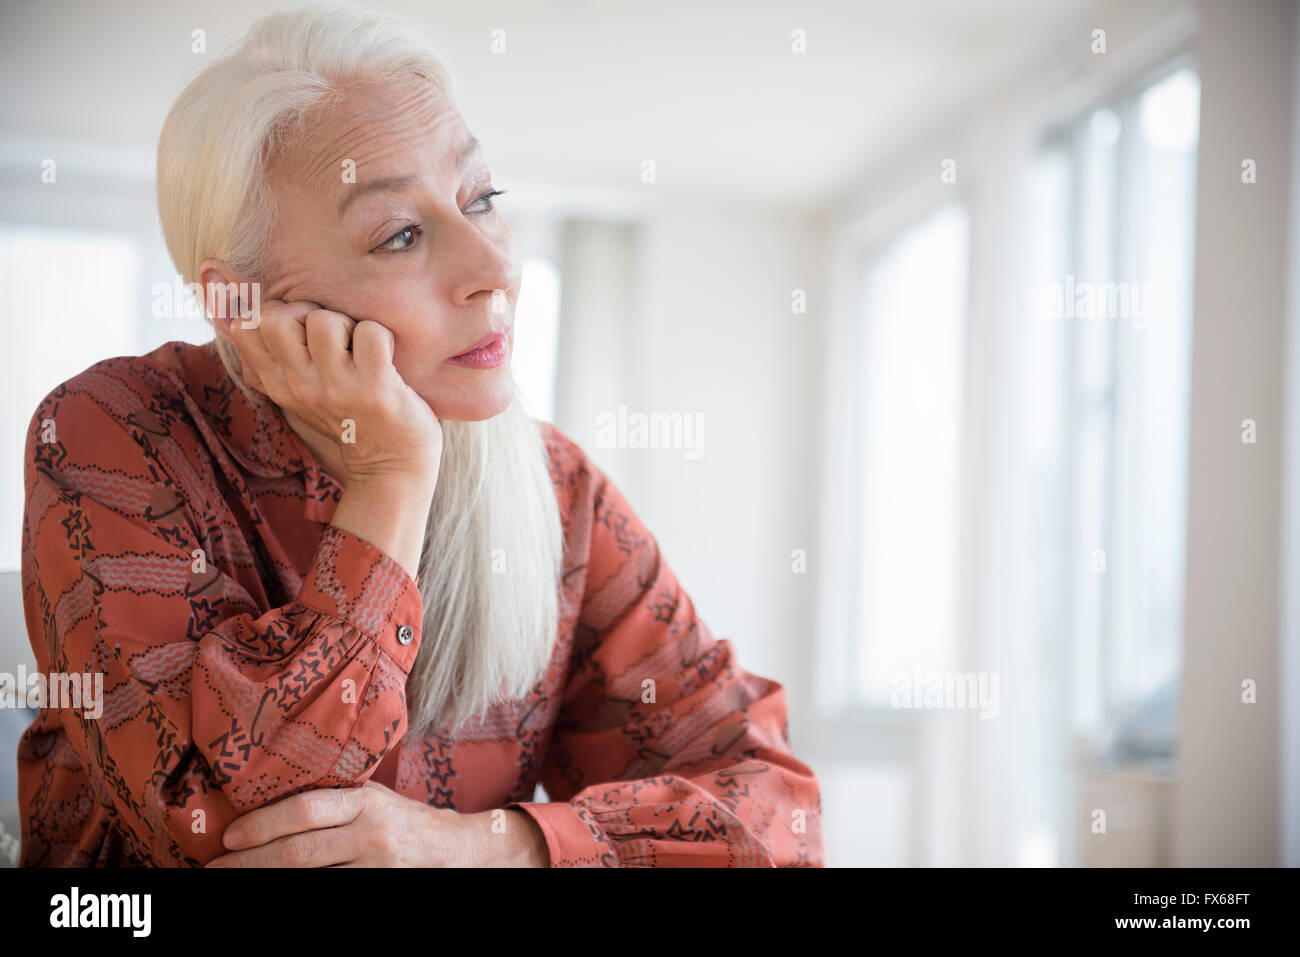 Caucasian woman sitting with chin in hand Stock Photo